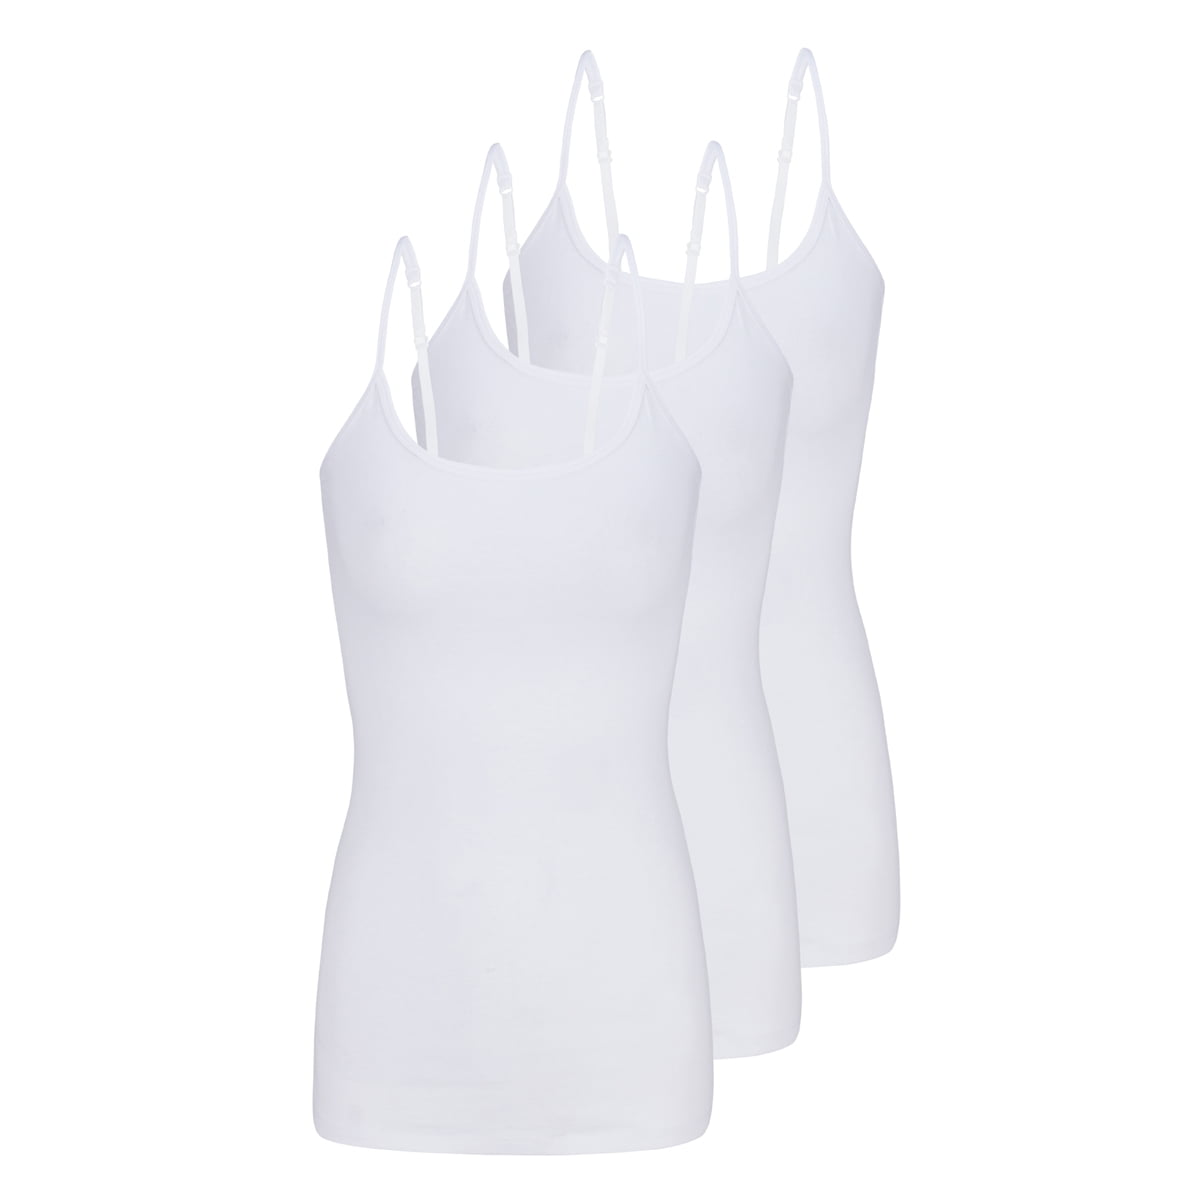 Natural Uniform Women's Camisole Cotton Stretch Slim-Fit Cami Soft and  Breathable Undershirt with Adjustable Strap Tank Top Multi Pack of 3  (White)